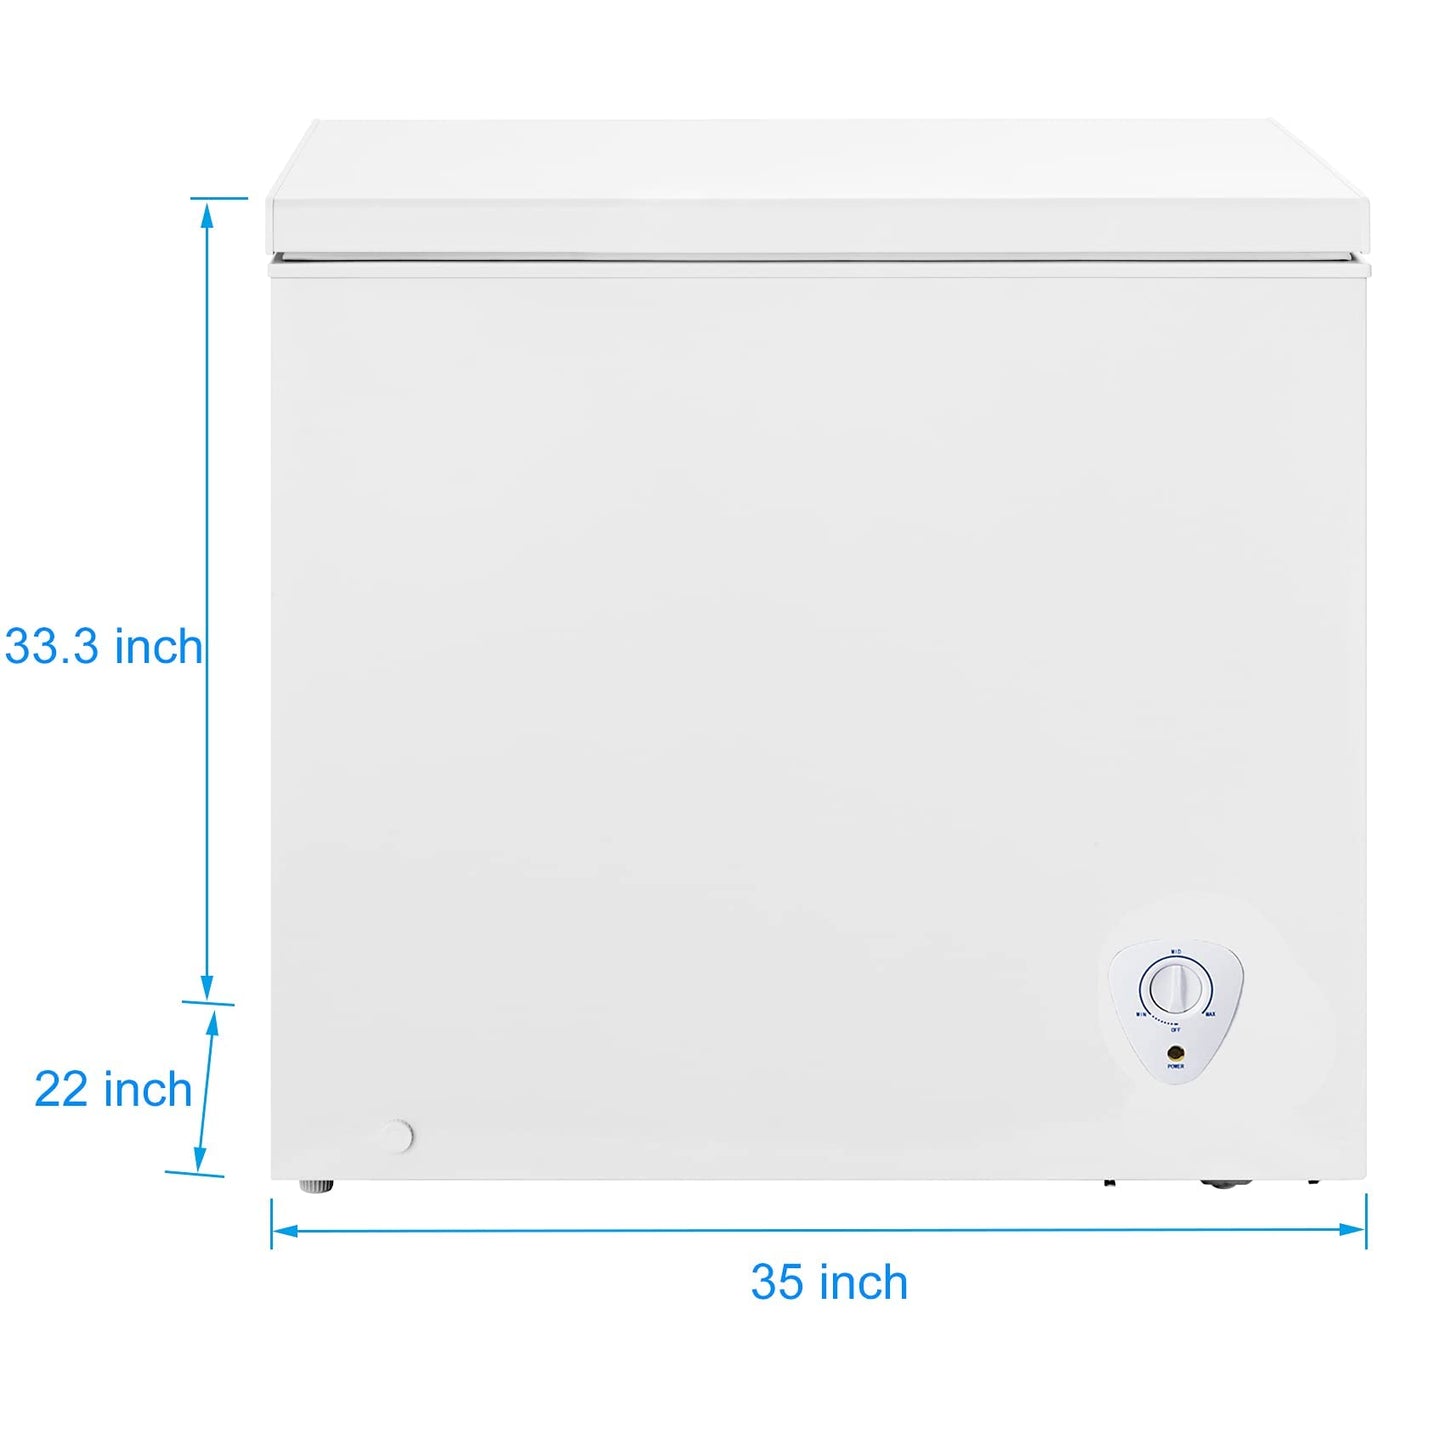 Deep Freezer 7 Cubic Feet Chest Freezer 7 cu. ft, SMETA Freezer Chest Garage Ready Large Freezer, Freezing Machine for Home and Kitchen with Removable Basket Thermostat Control for Apartment in White